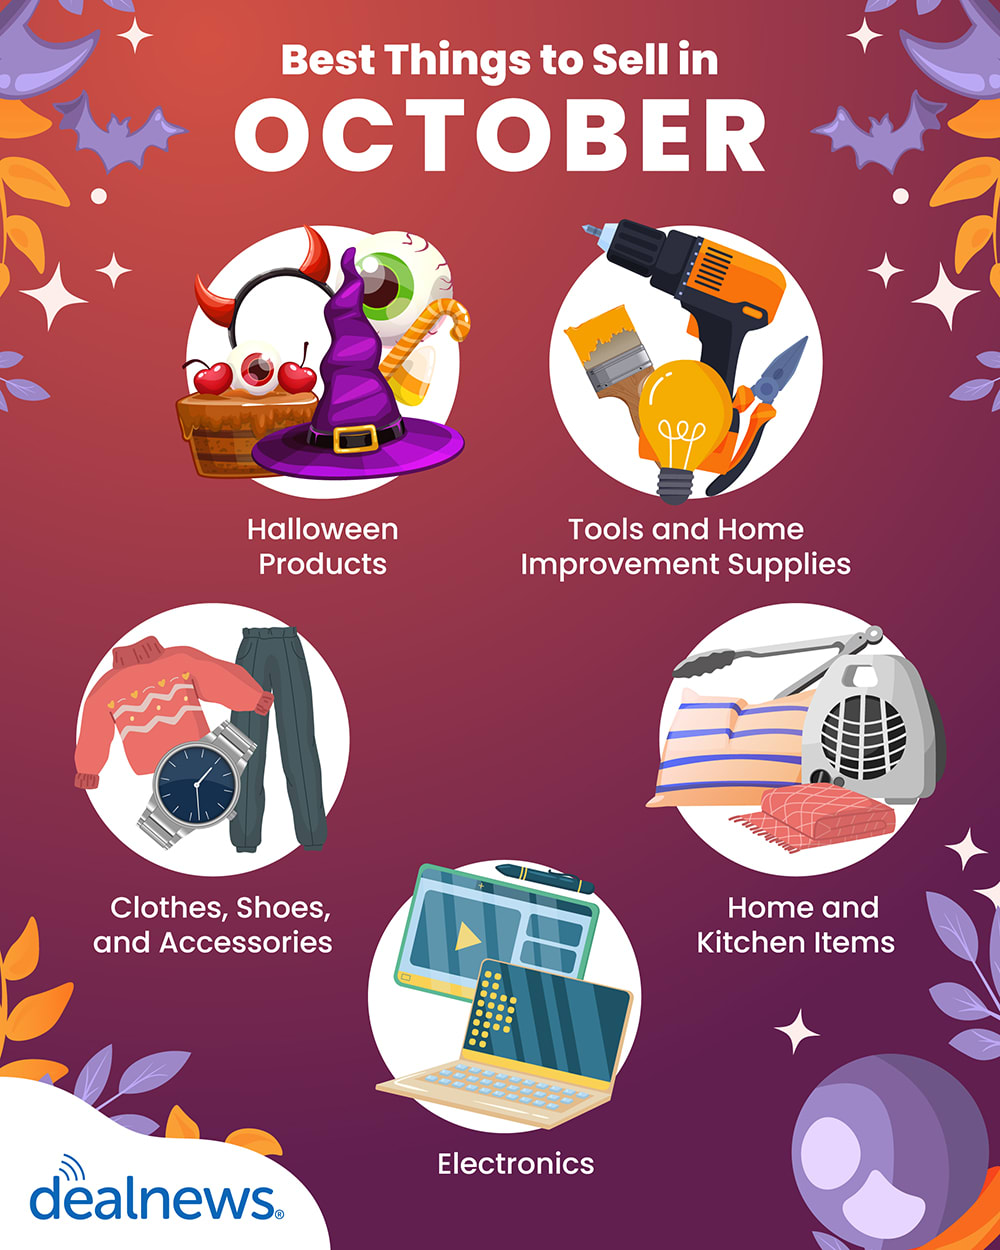 https://c.dlnws.com/image/upload/c_limit,f_auto,q_auto,w_1800/v1696425983/Blog%20Infographics/DN-what-to-sell-in-October-2023.jpg